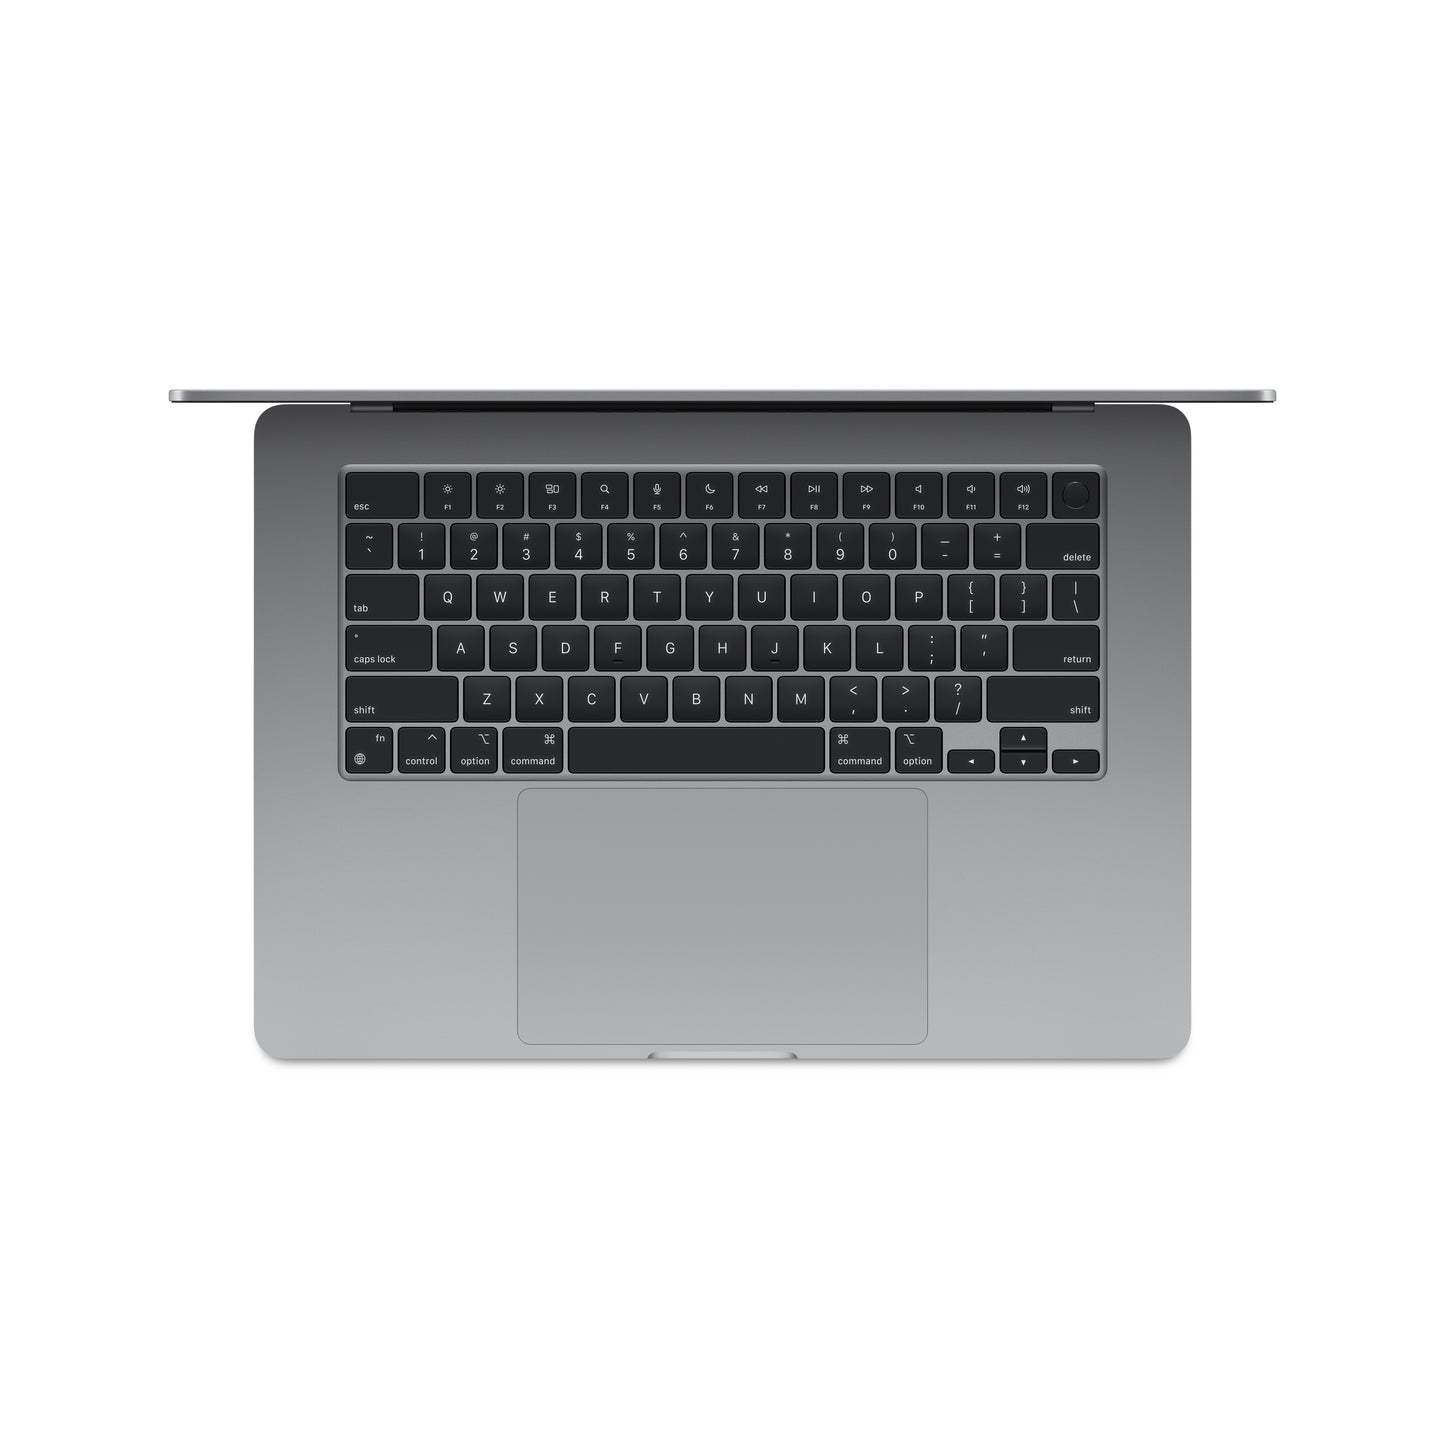 15-inch MacBook Air with Apple M3 and 10-core GPU